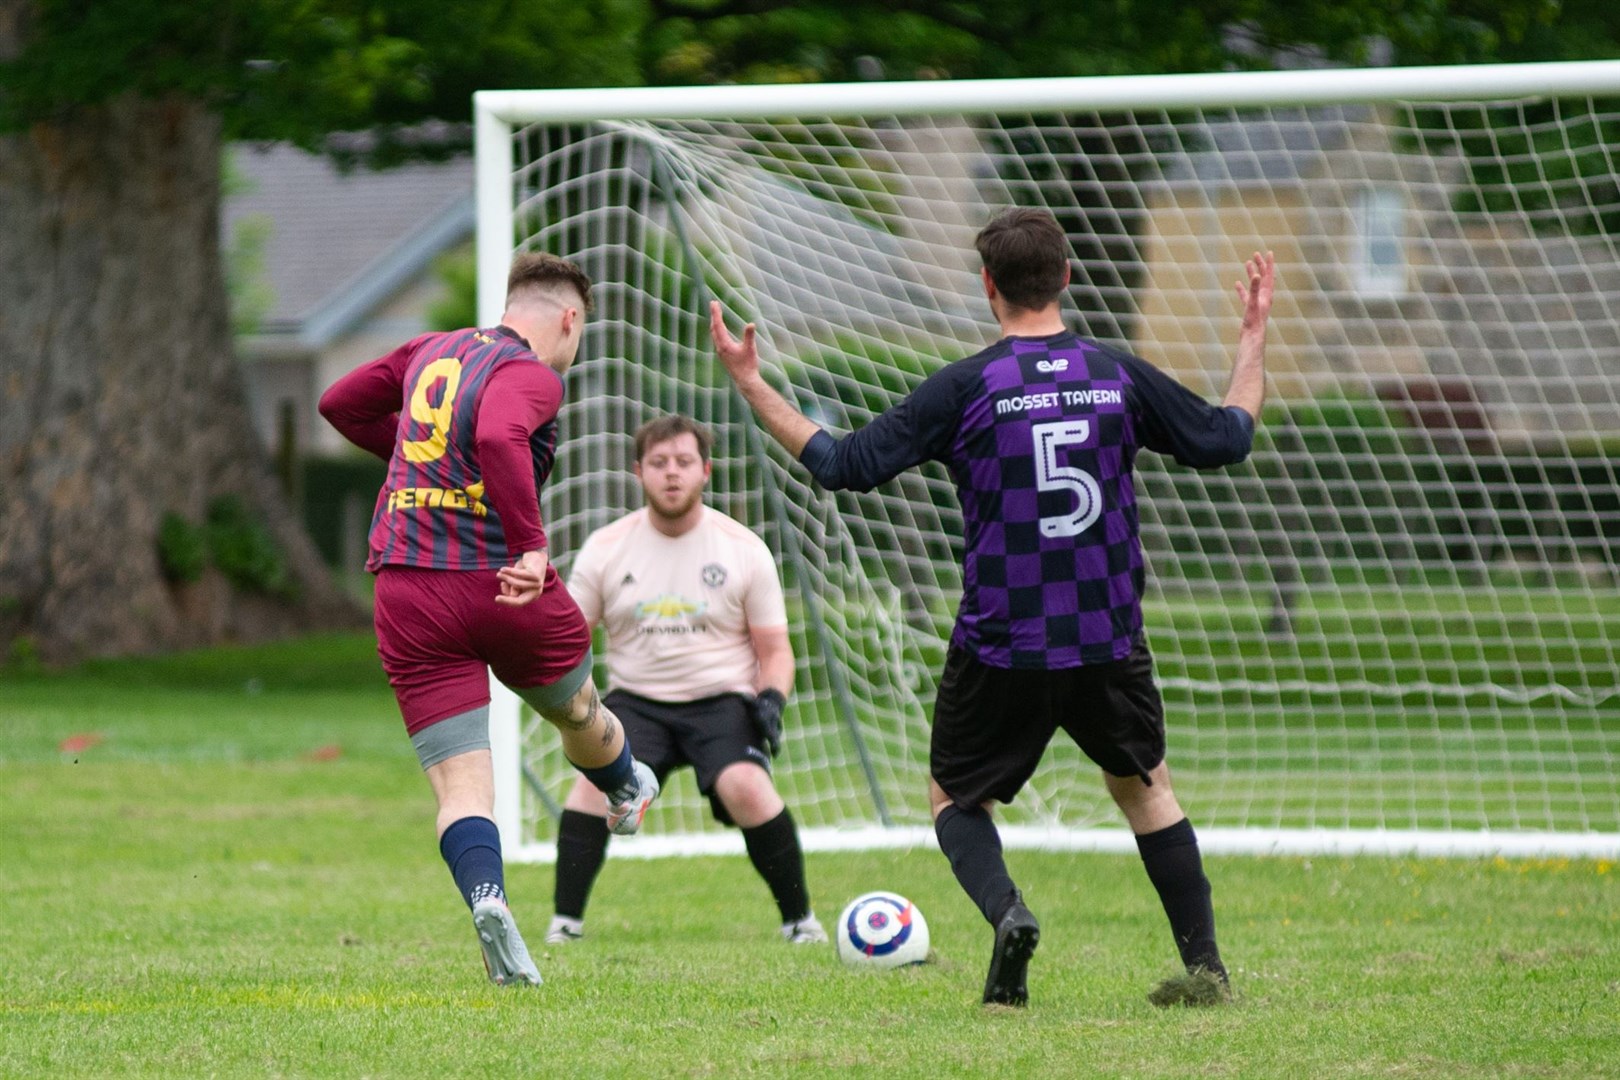 Darren Robertson scores the Caberfeidh's second of the evening. ..Mosset Tavern FC (5) vs Caberfeidh FC (4) - Forres & Nairn Welfare League...Picture: Daniel Forsyth..